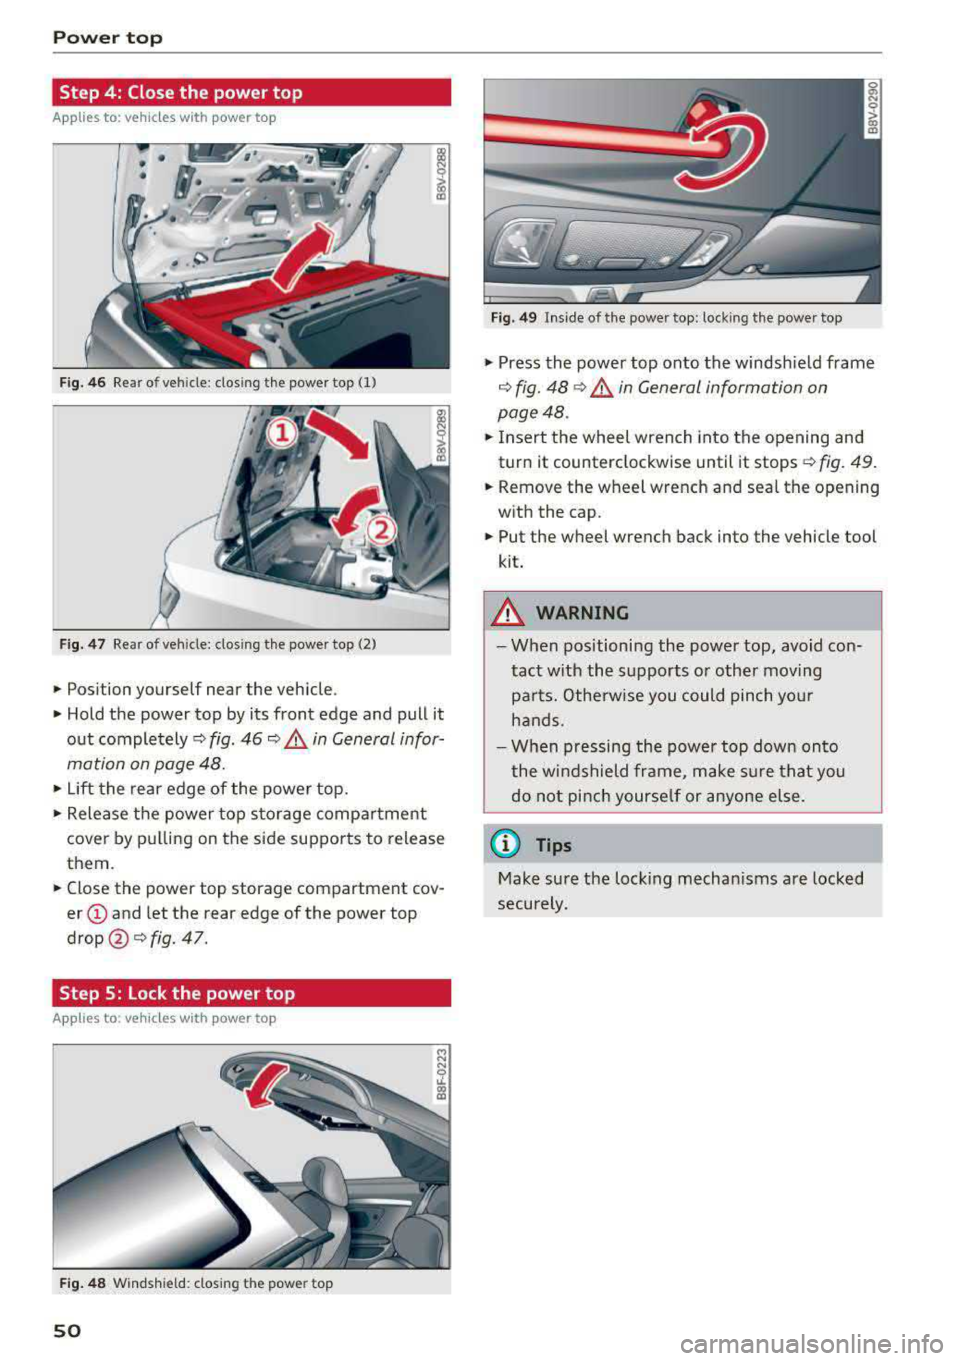 AUDI A3 SEDAN 2017 Workshop Manual Power  top 
Step  4:  Close  the  power  top 
Applies  to:  vehicles  w ith  power  top 
Fig. 46 Rear of  vehicle:  closing the  power  top  (1) 
Fig. 47 Rear of veh icle: clos ing the  power  top (2)